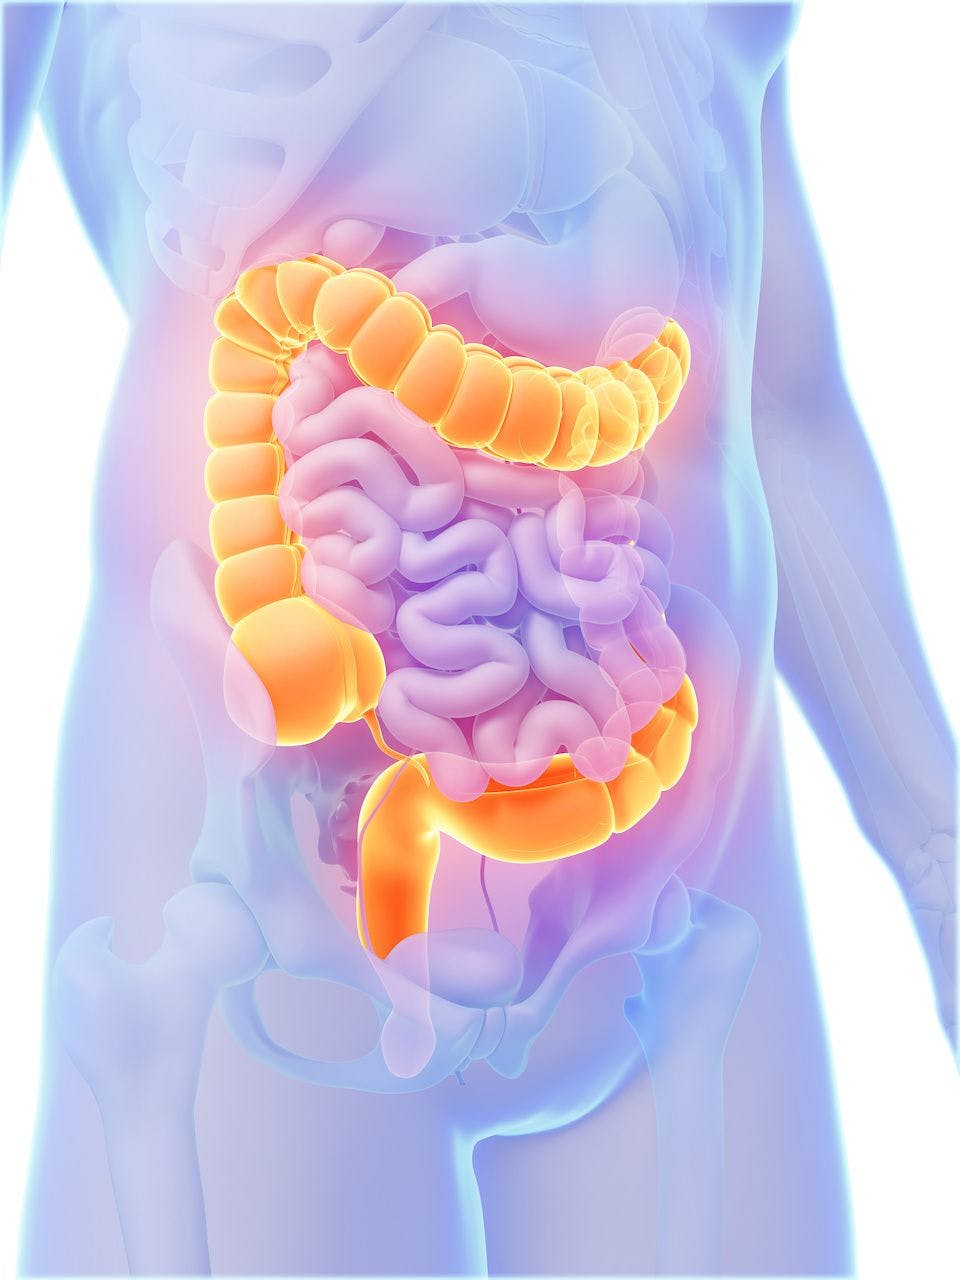 Risk of New IBD Rises for Patients Treated With Etanercept